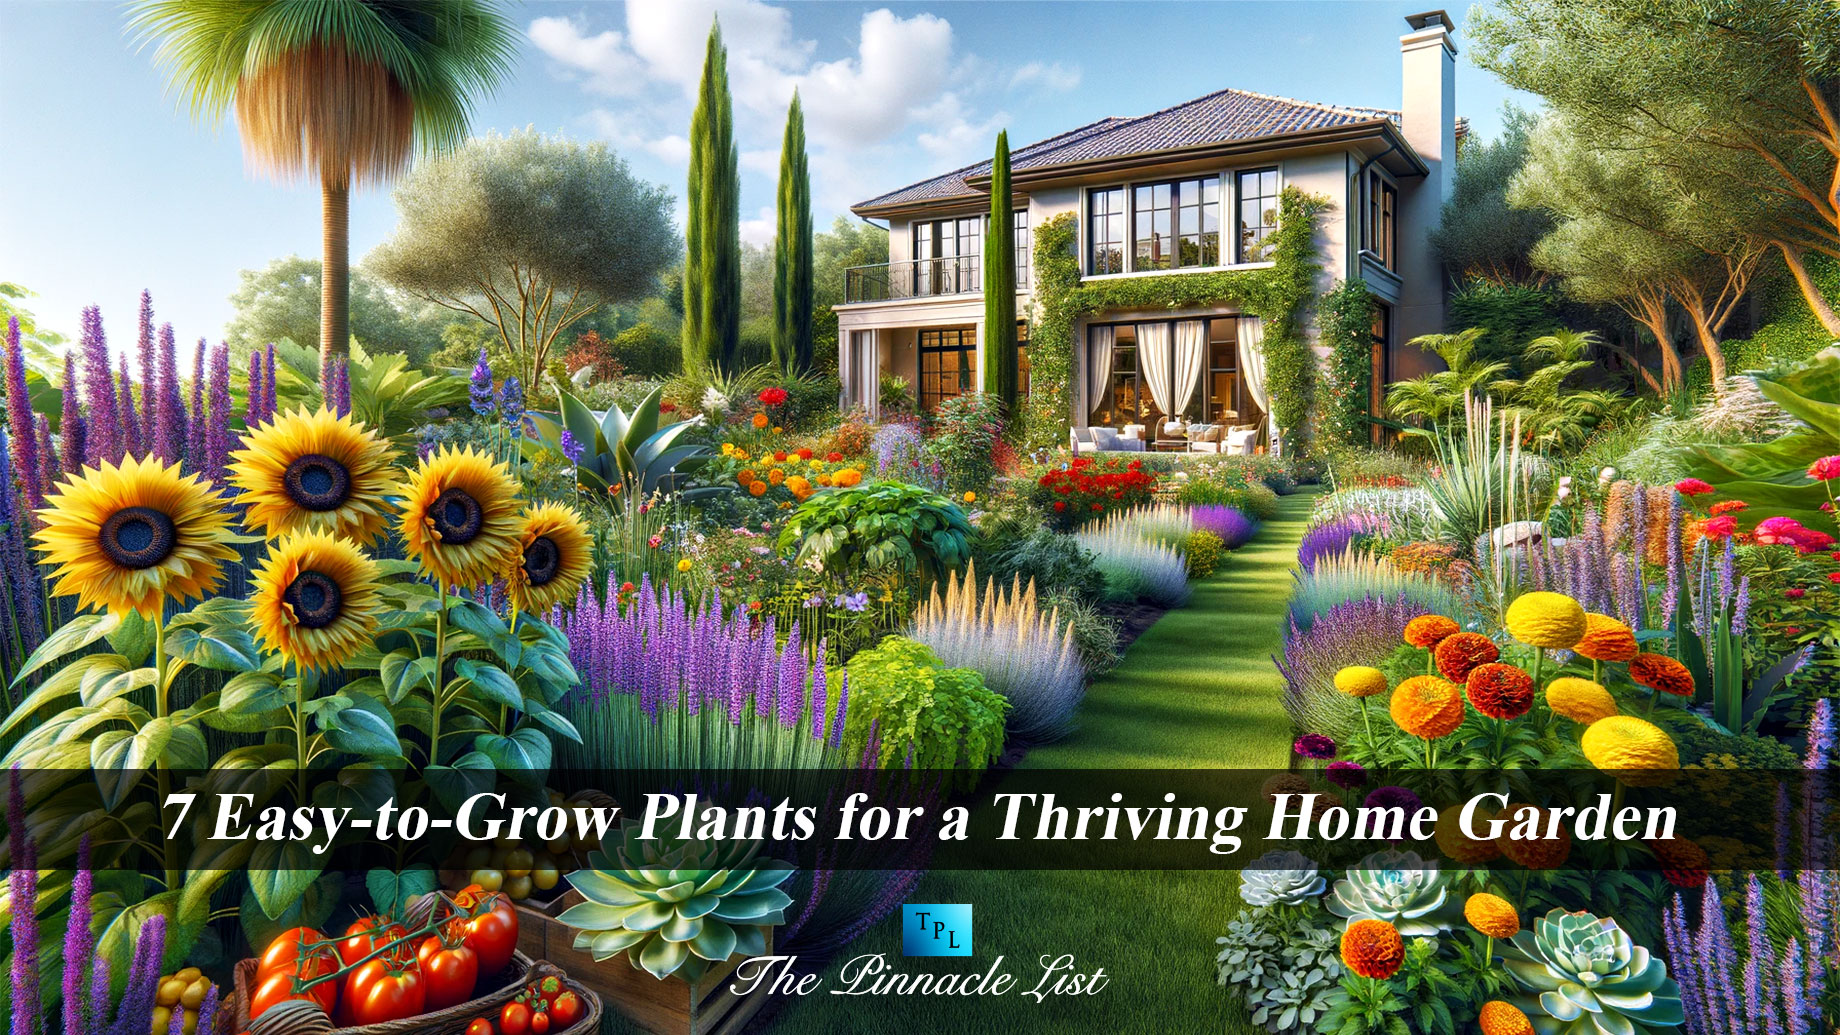 7 Easy-to-Grow Plants for a Thriving Home Garden